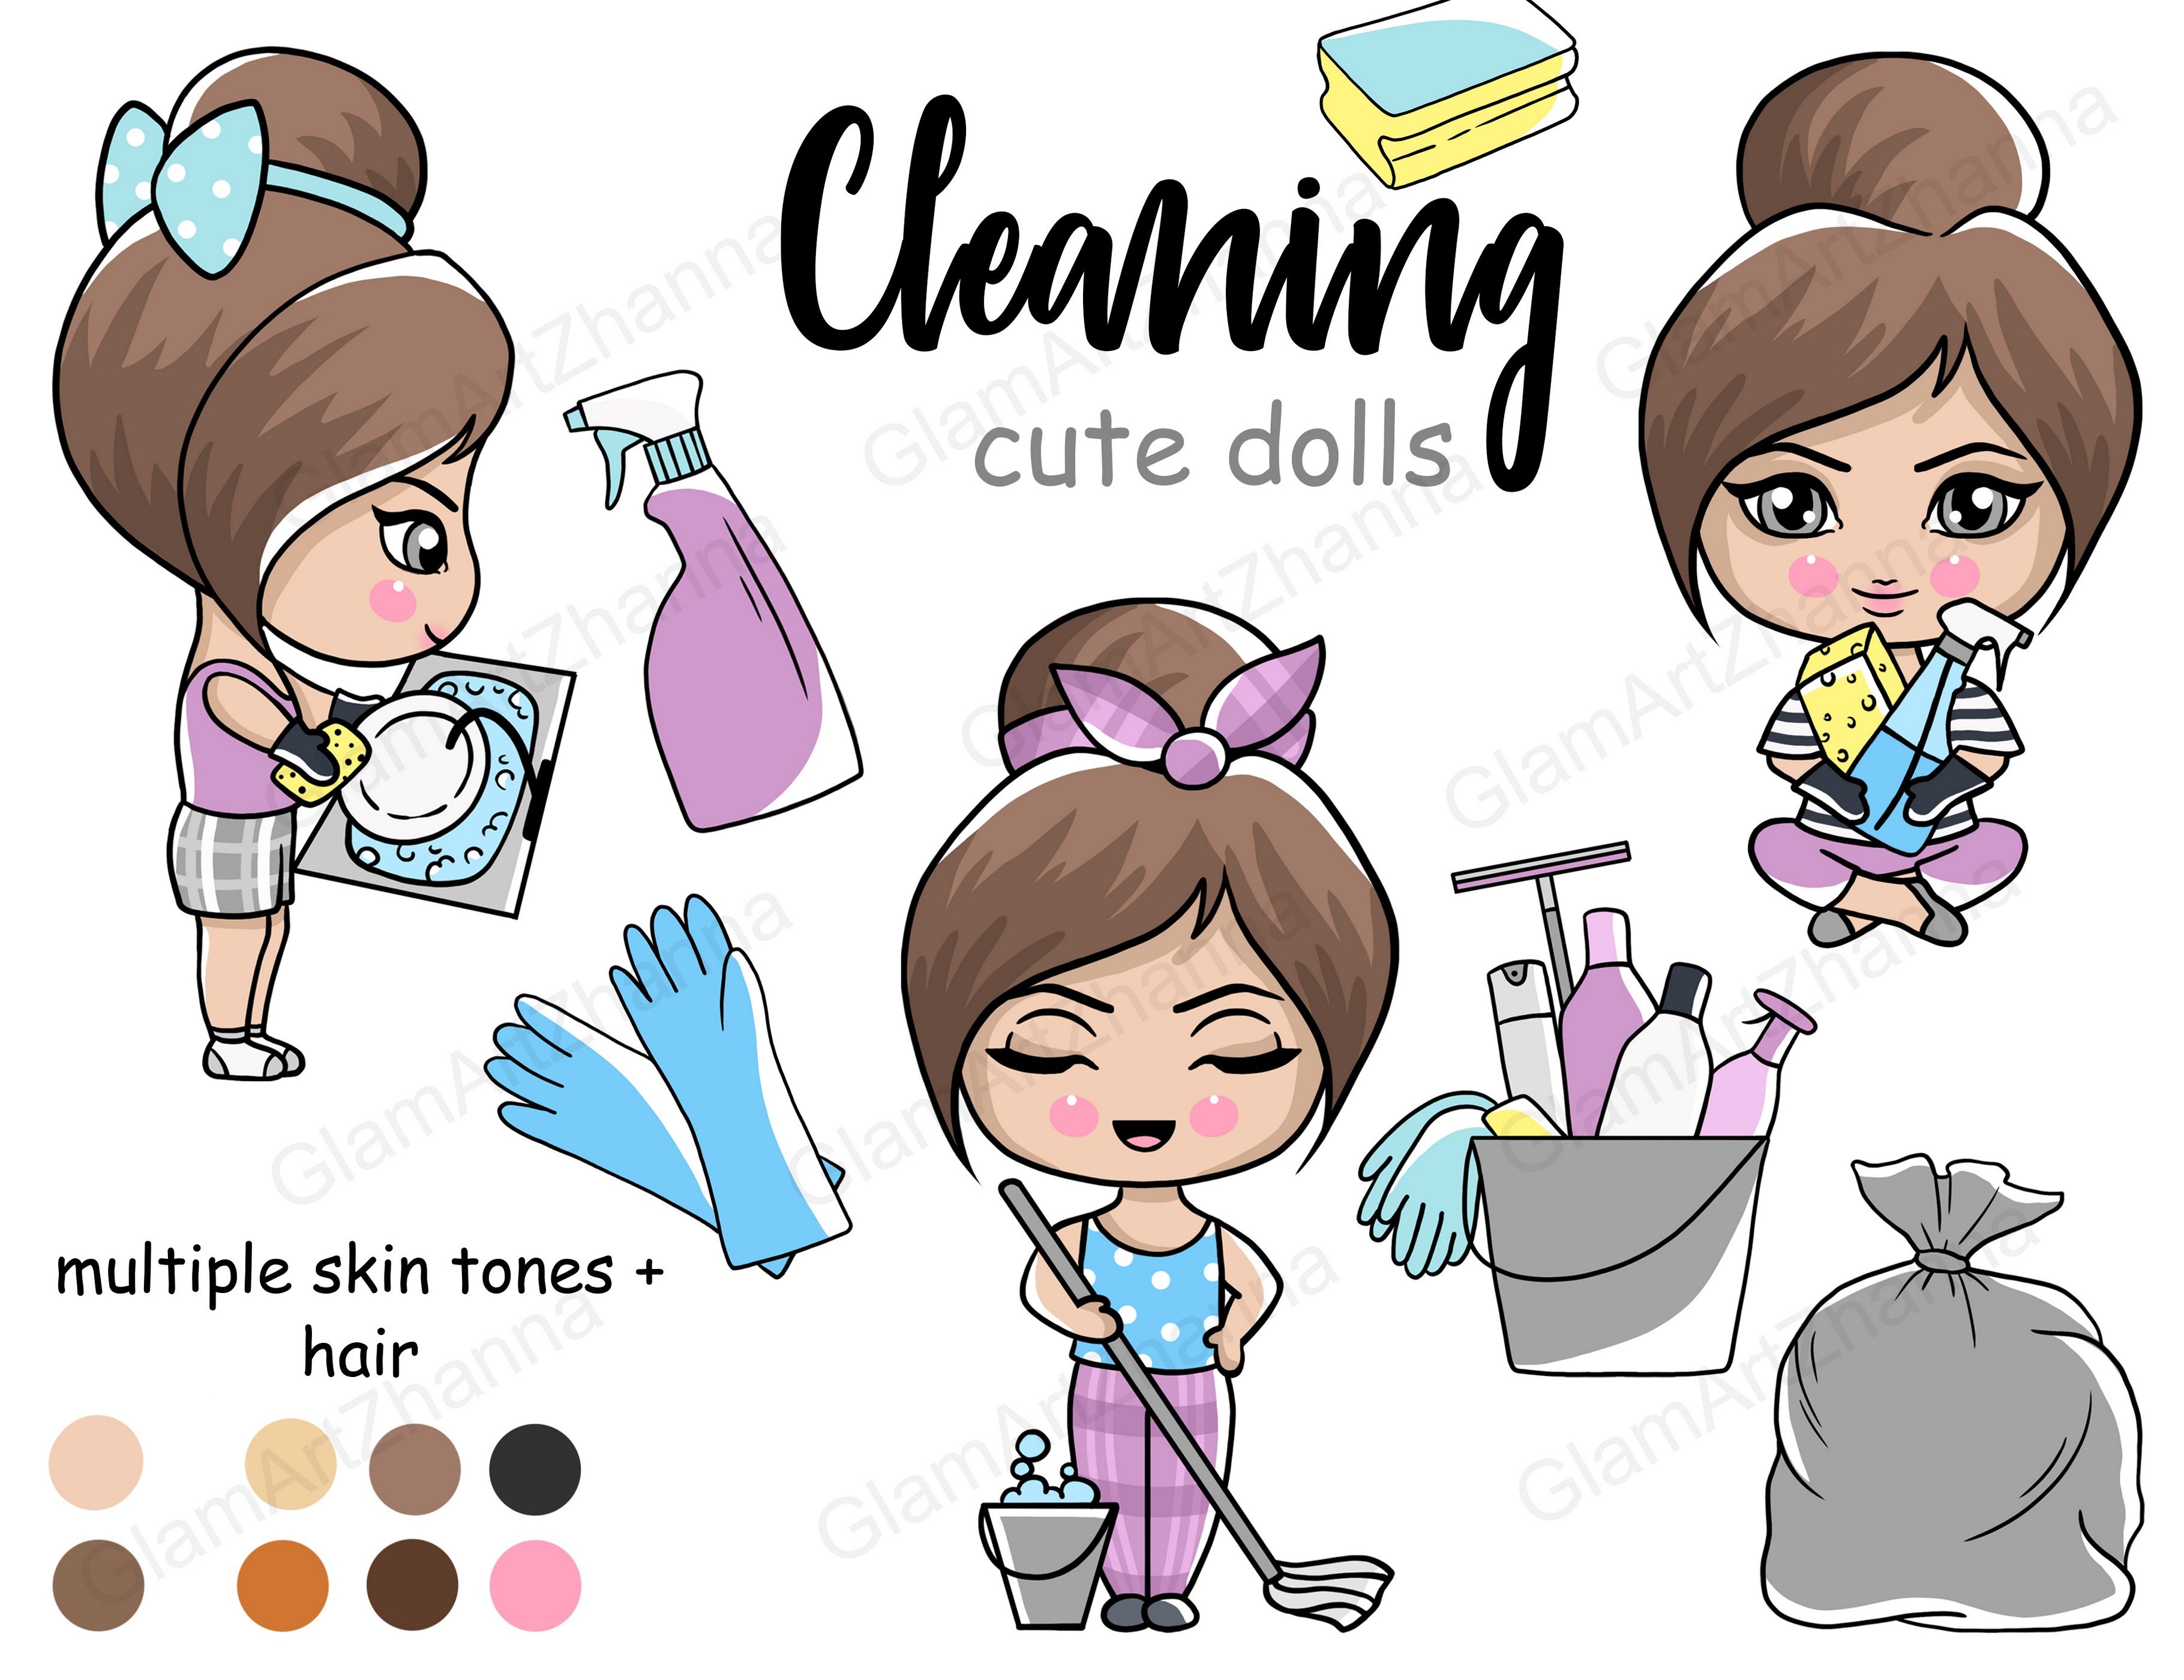 Cleaning Cute Dolls cover image.